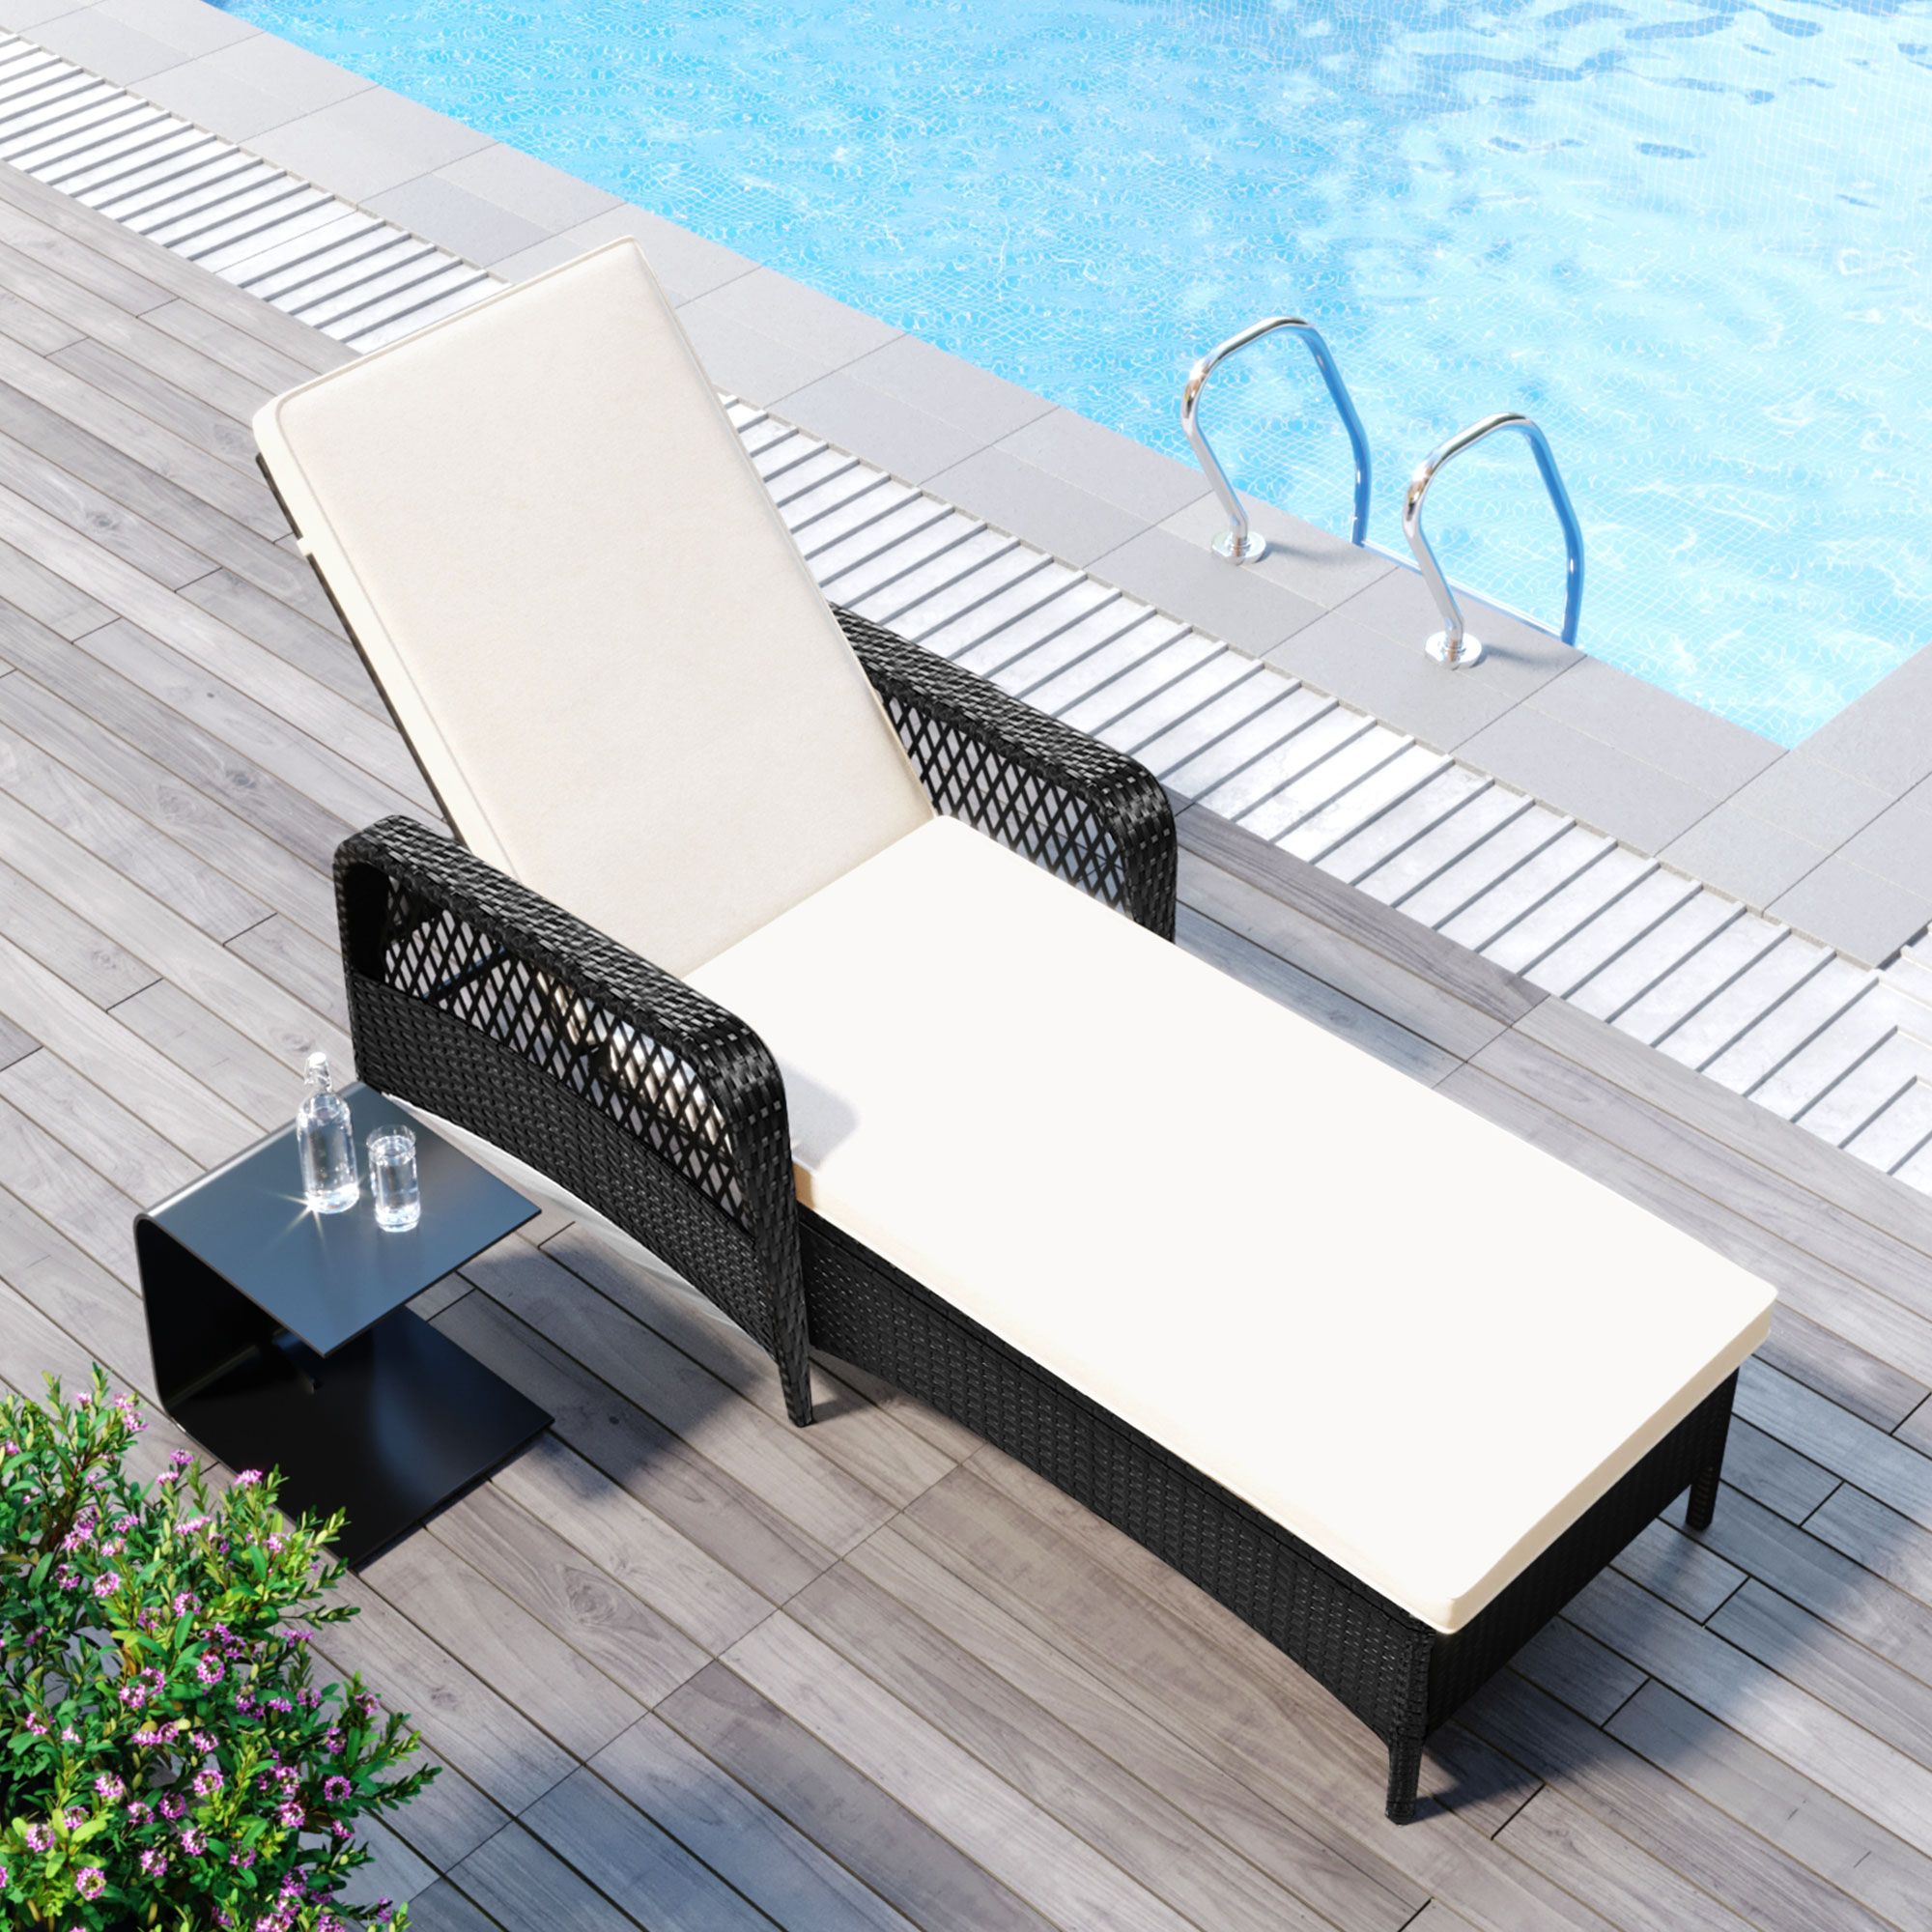 Outdoor Patio Reclining Chair Sunbed with Adjustable Backrest, Black Wicker All-Weather Chaise Lounge Chair for Garden Yard Patio - image 4 of 8